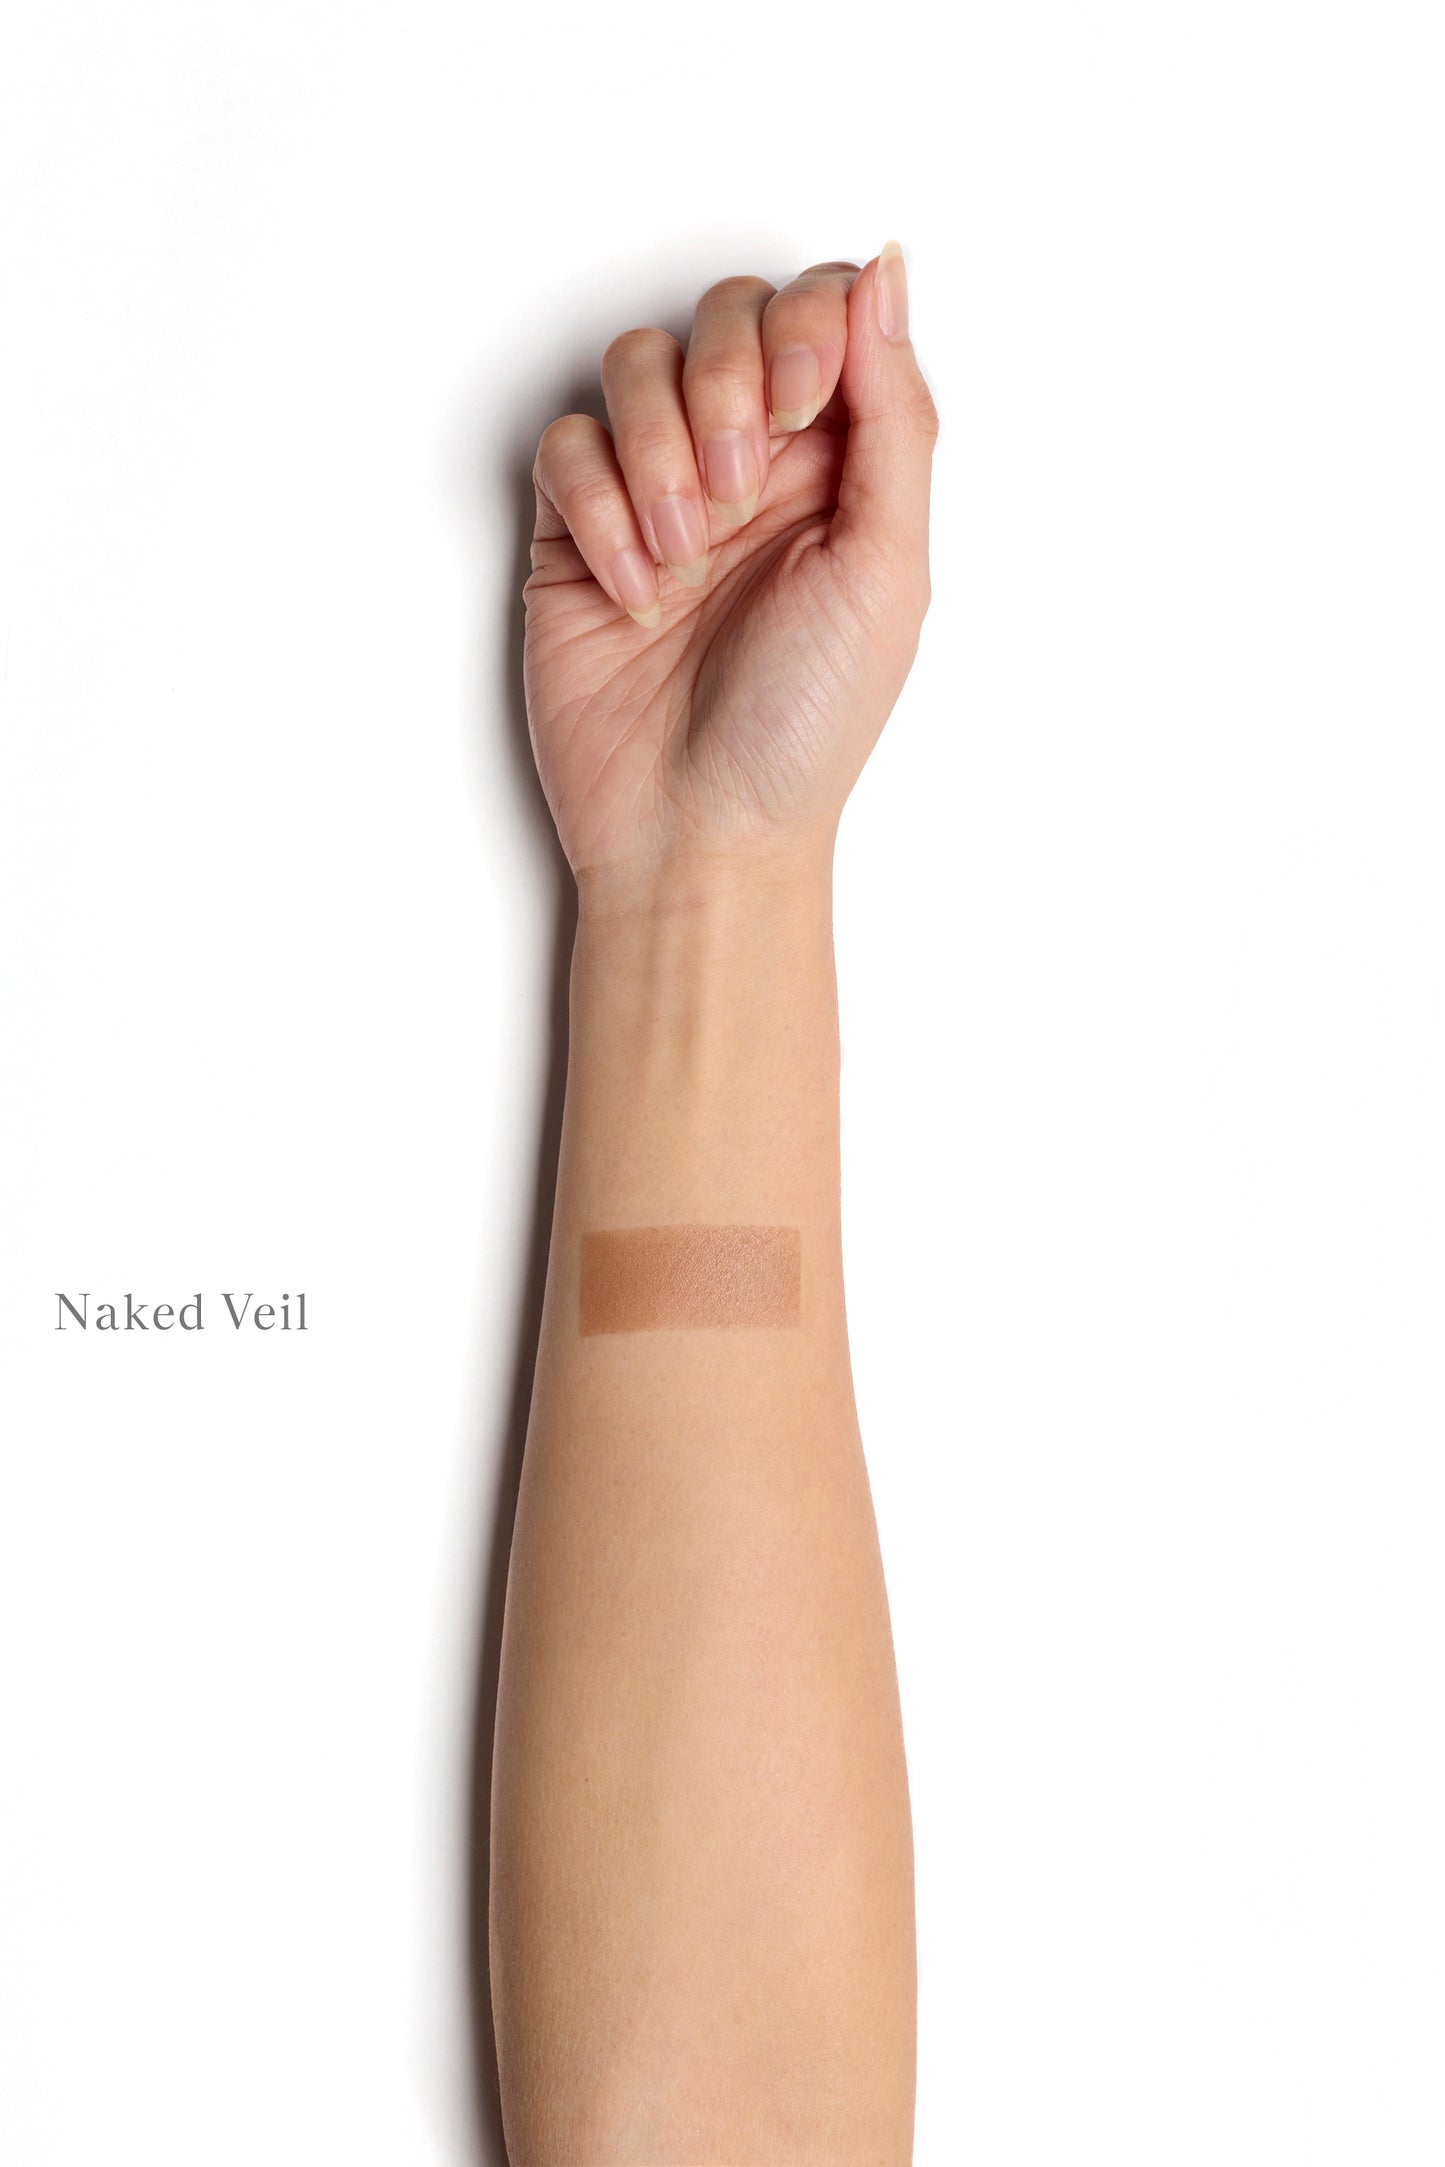 A swatch of a light taupe blush in a rectangle on a medium toned forearm. The hand is semi-closed in a resting position. There is no nail polish on the nails. 